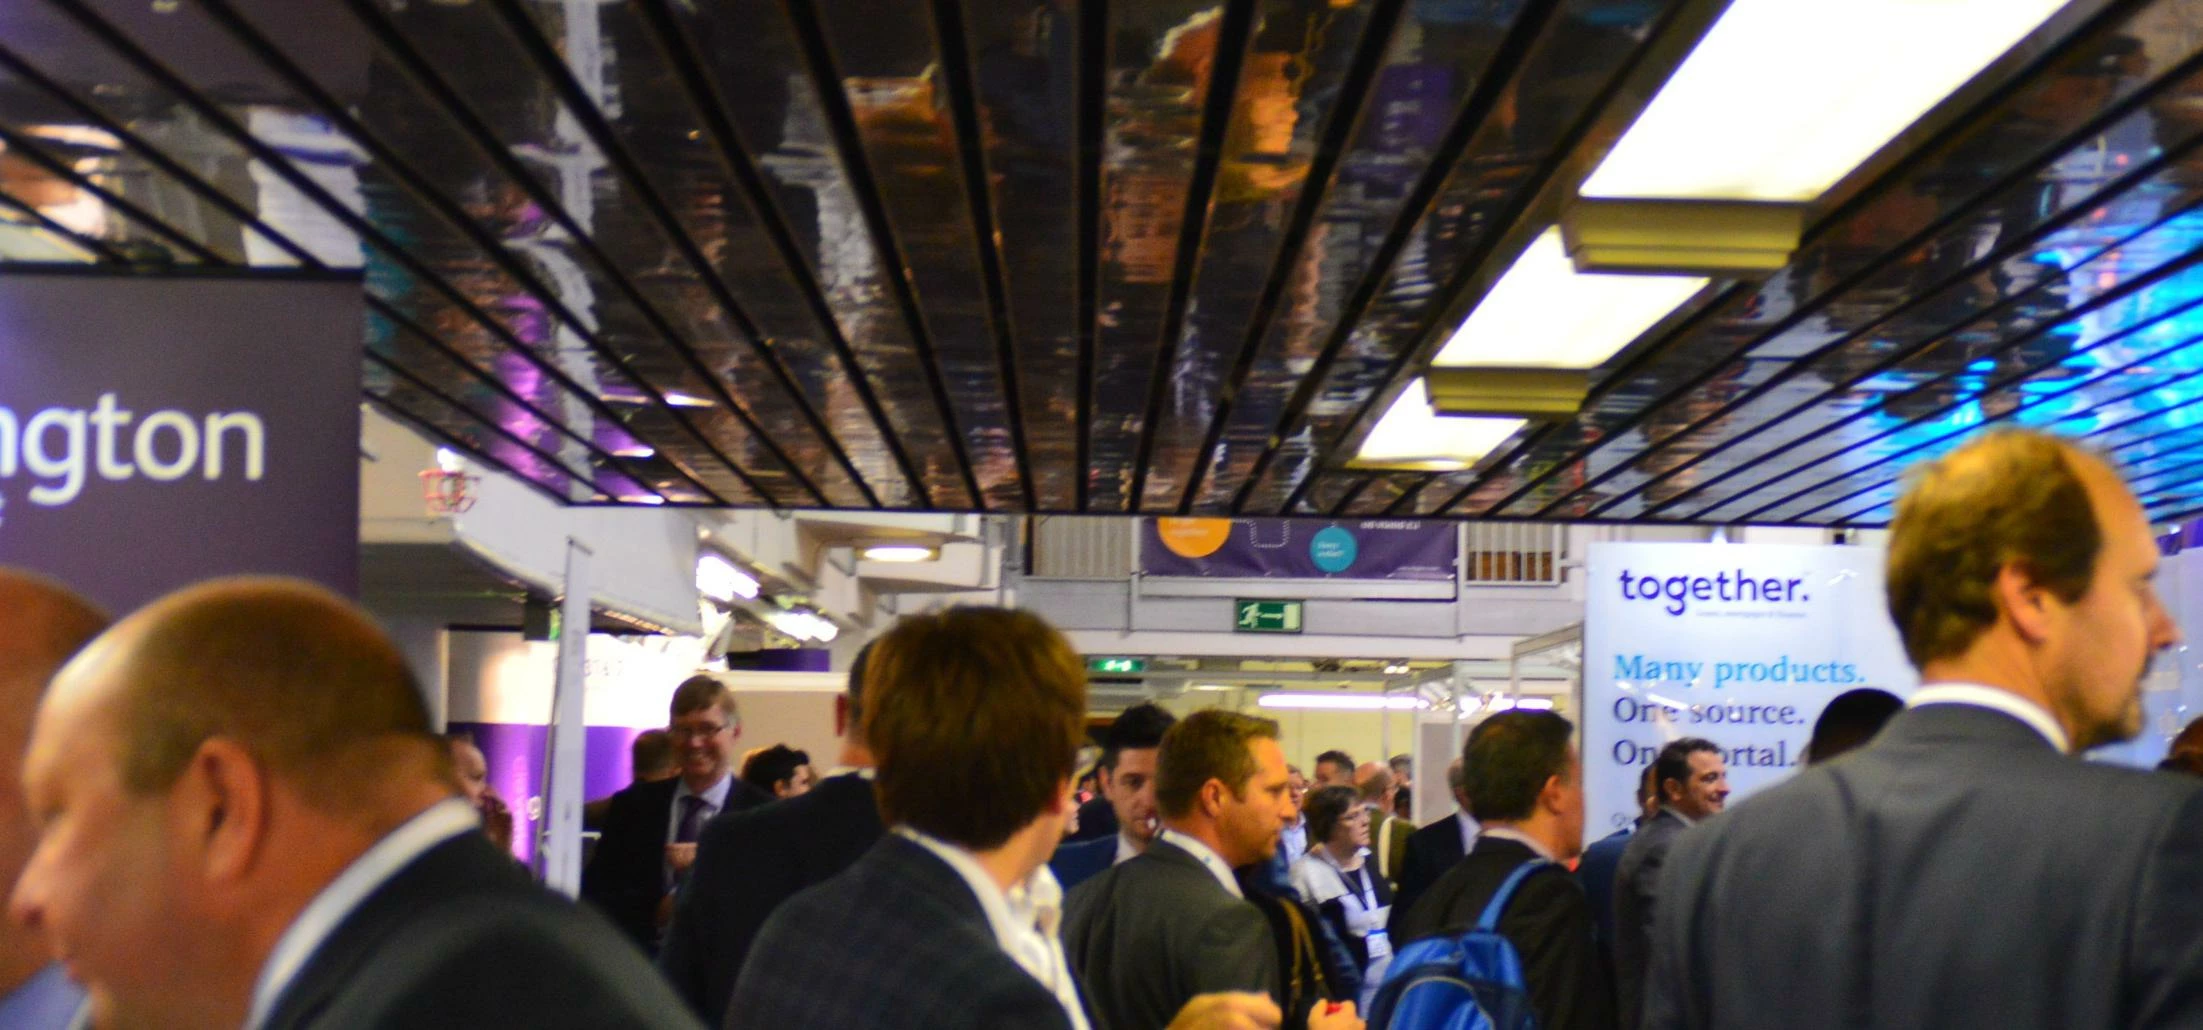 MBE Expo London a huge success